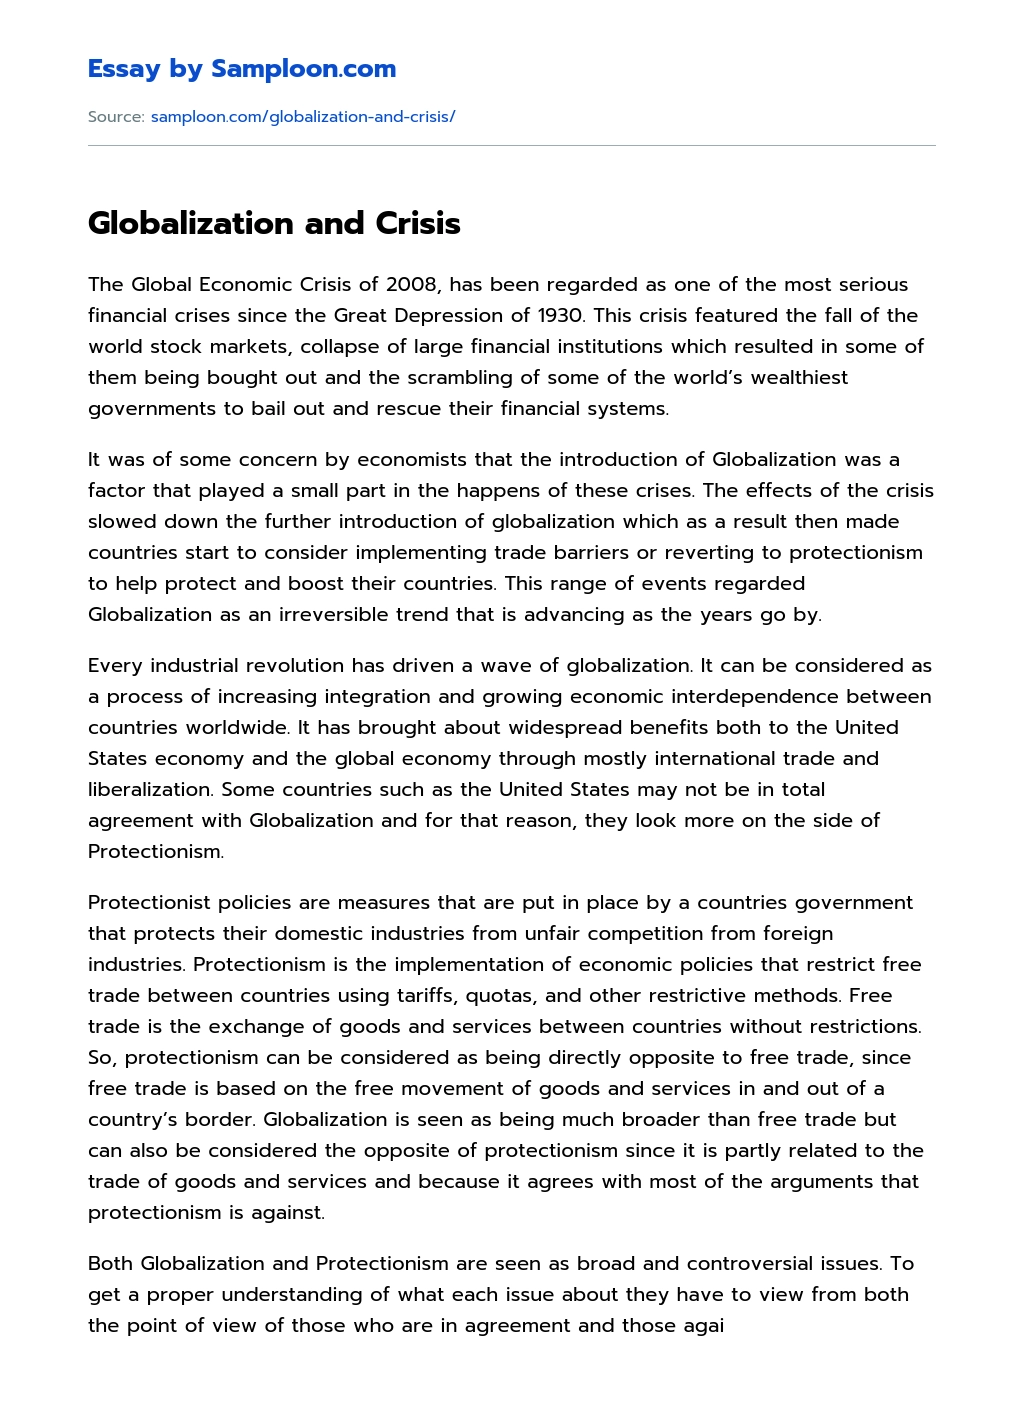 Globalization and Crisis essay